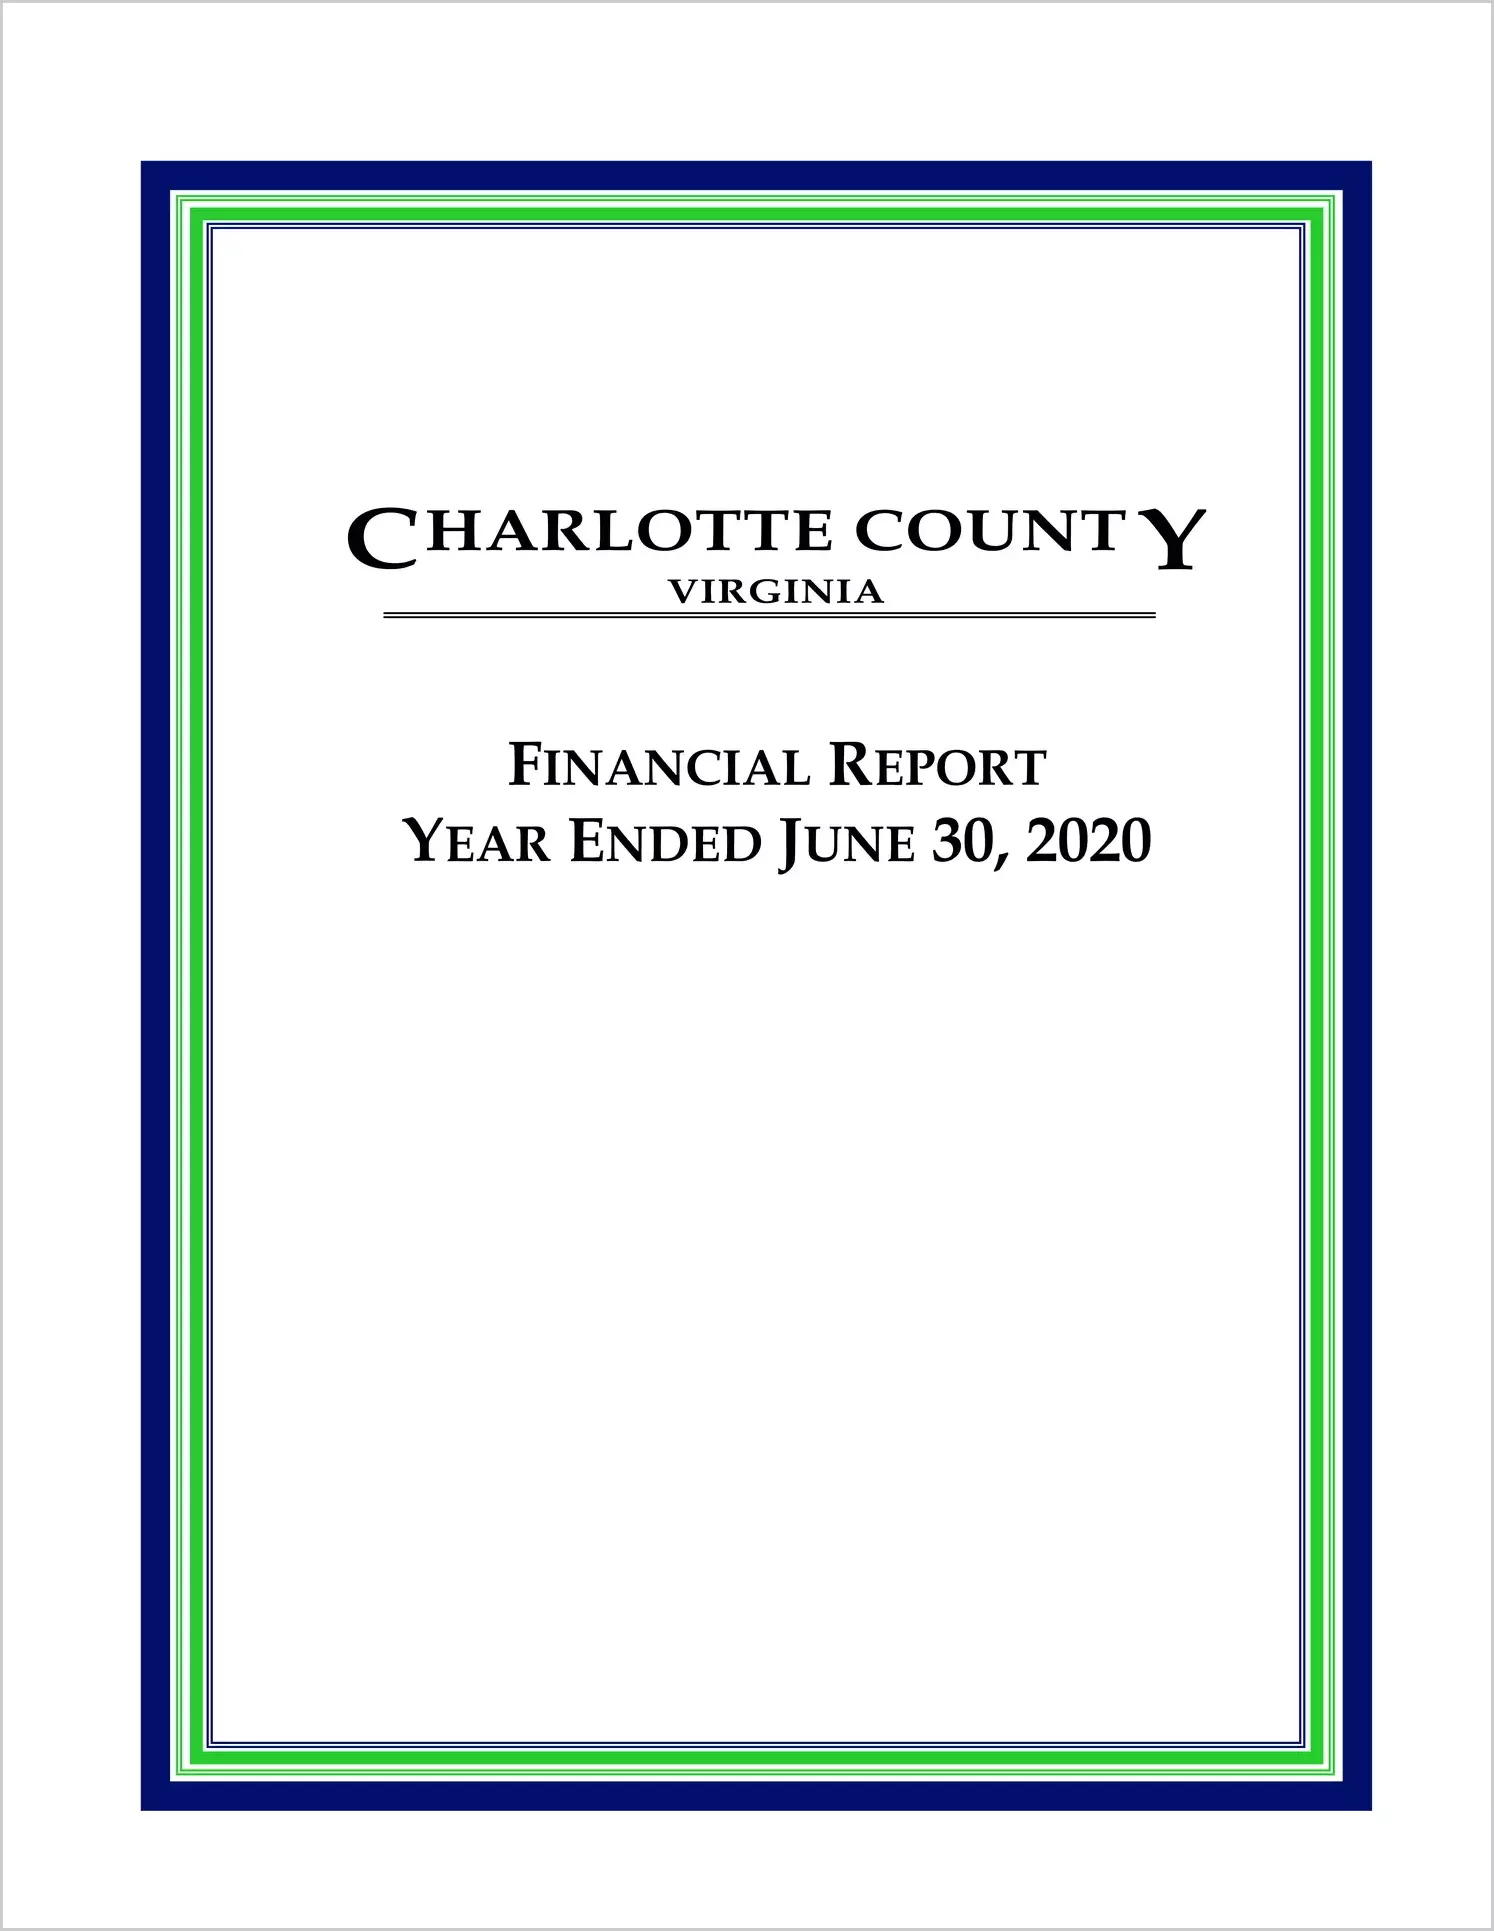 2020 Annual Financial Report for County of Charlotte